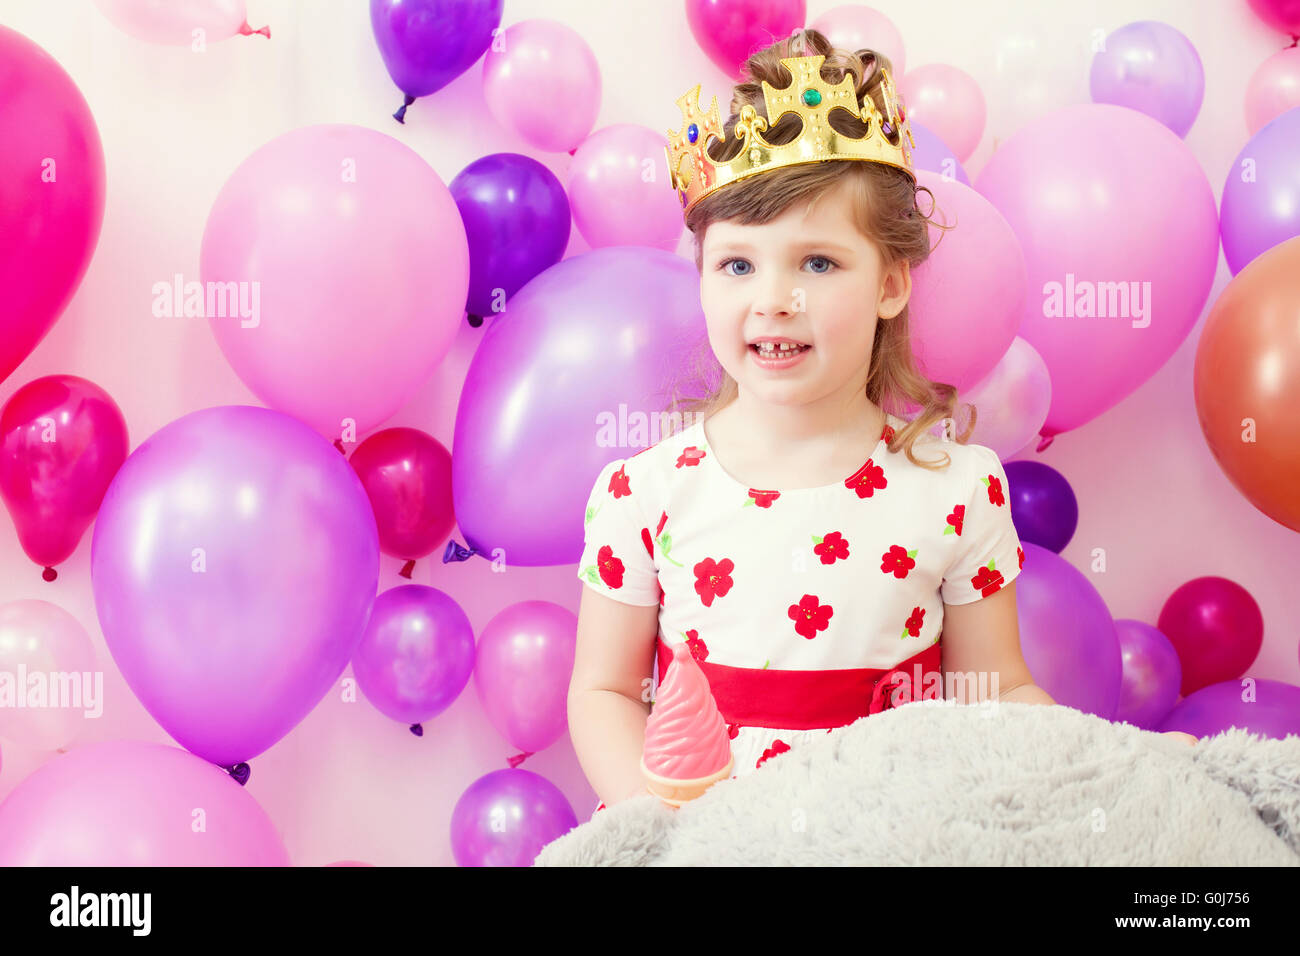 Cute girl posing in crown on balloons background Stock Photo